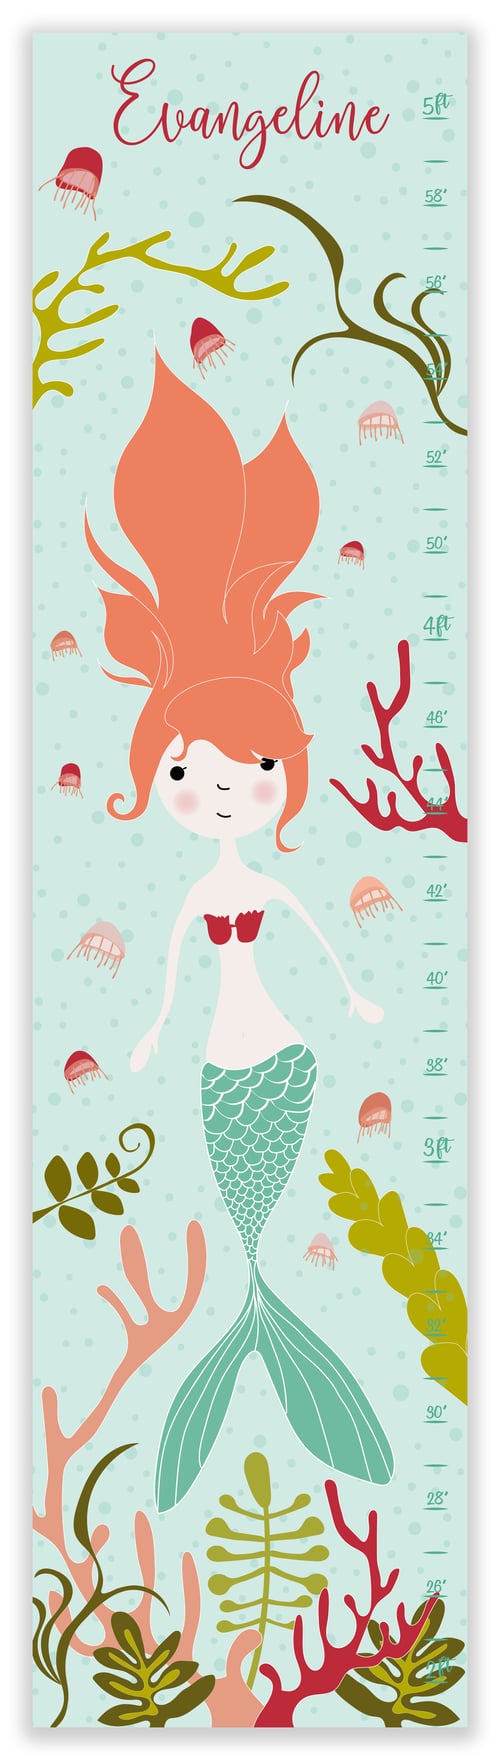 Image of Mermaid Under the Sea Personalized Canvas Growth Chart